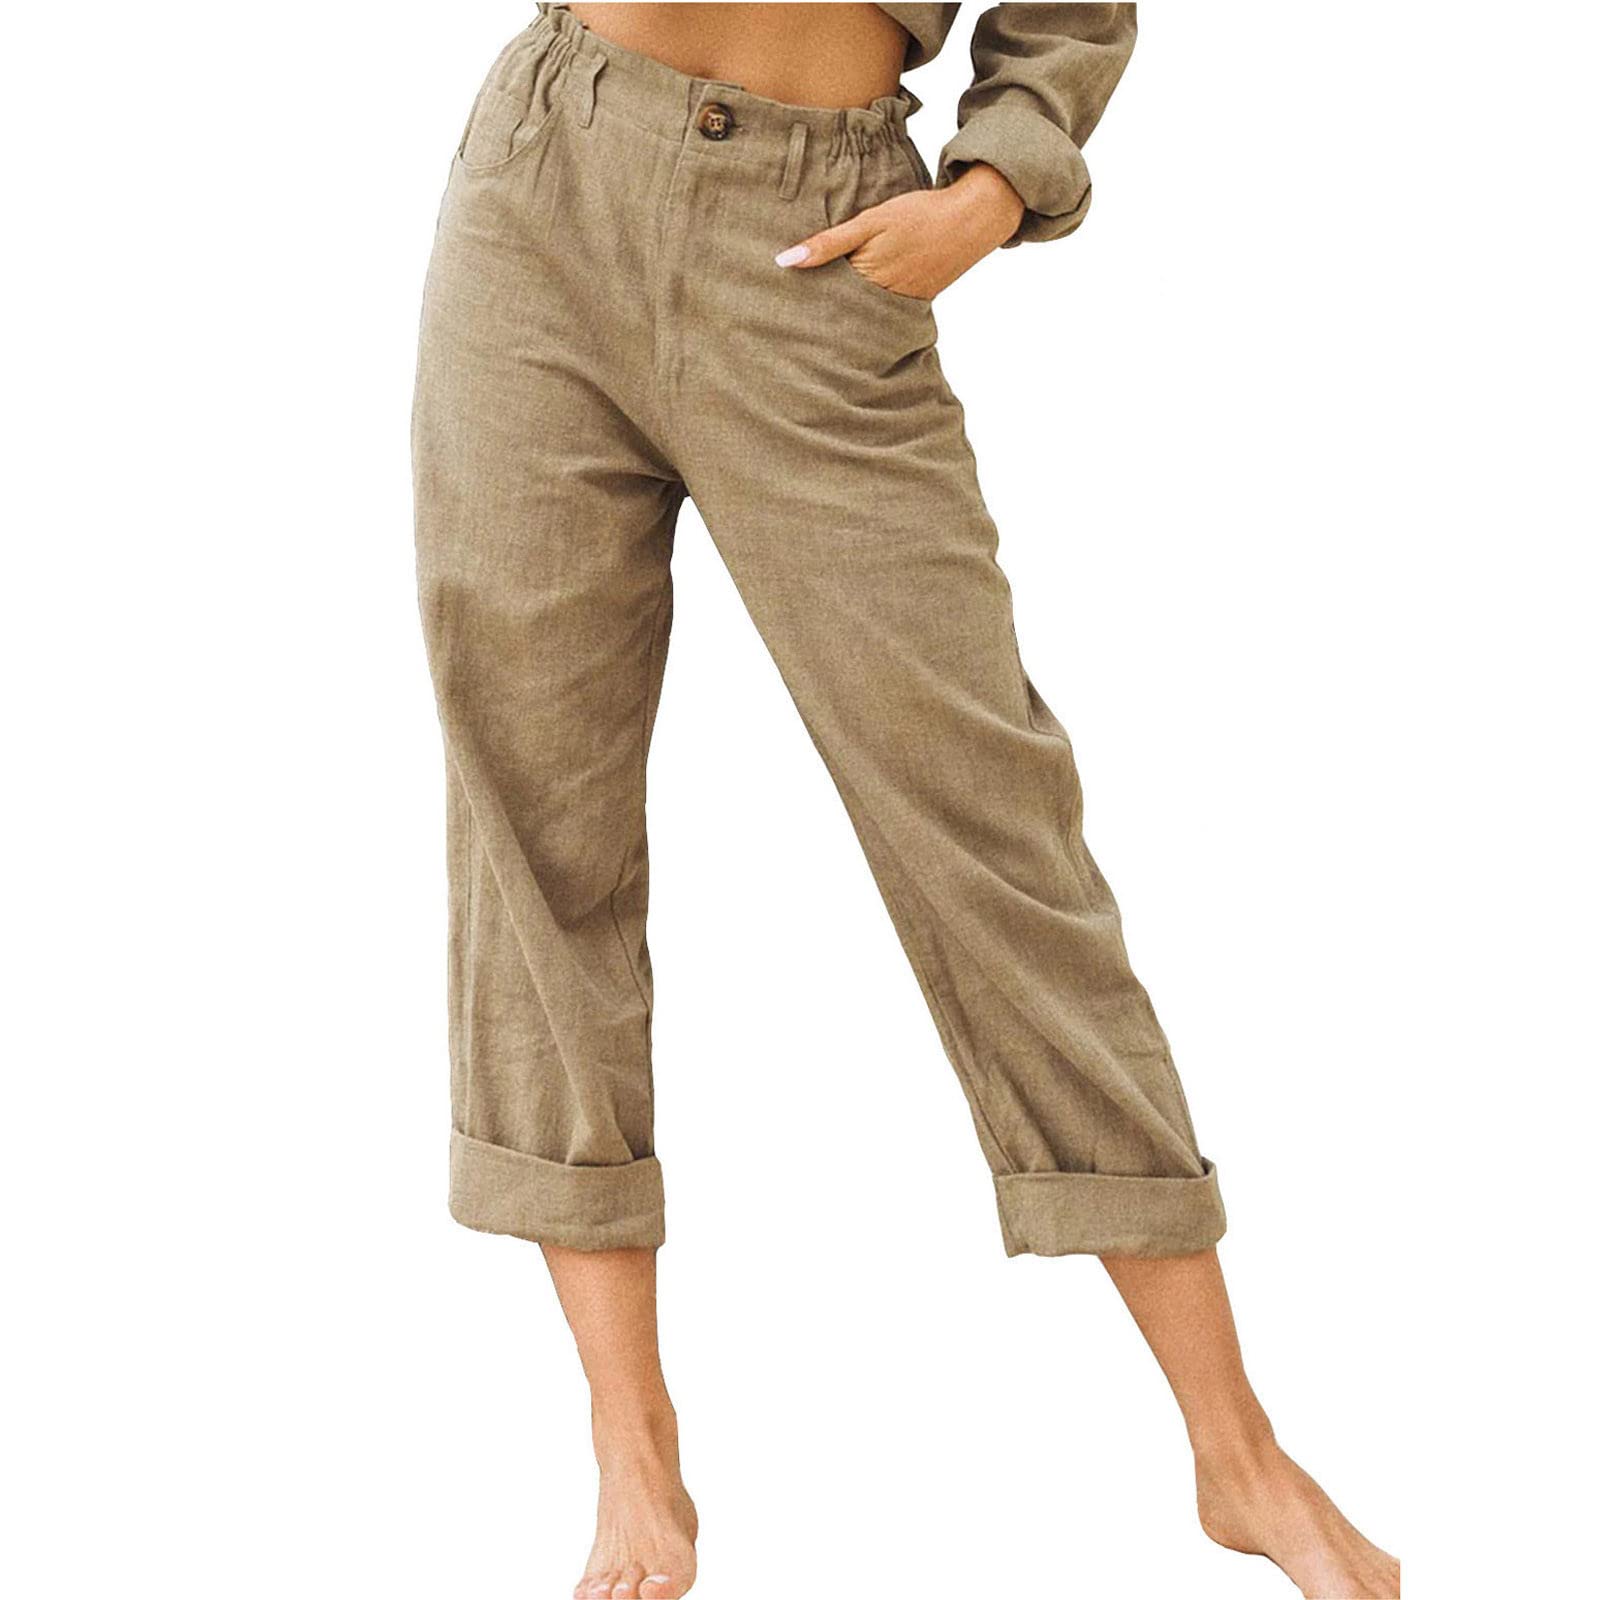 Cropped Pants Linen Pants for Women Summer Casual Pockets Cotton